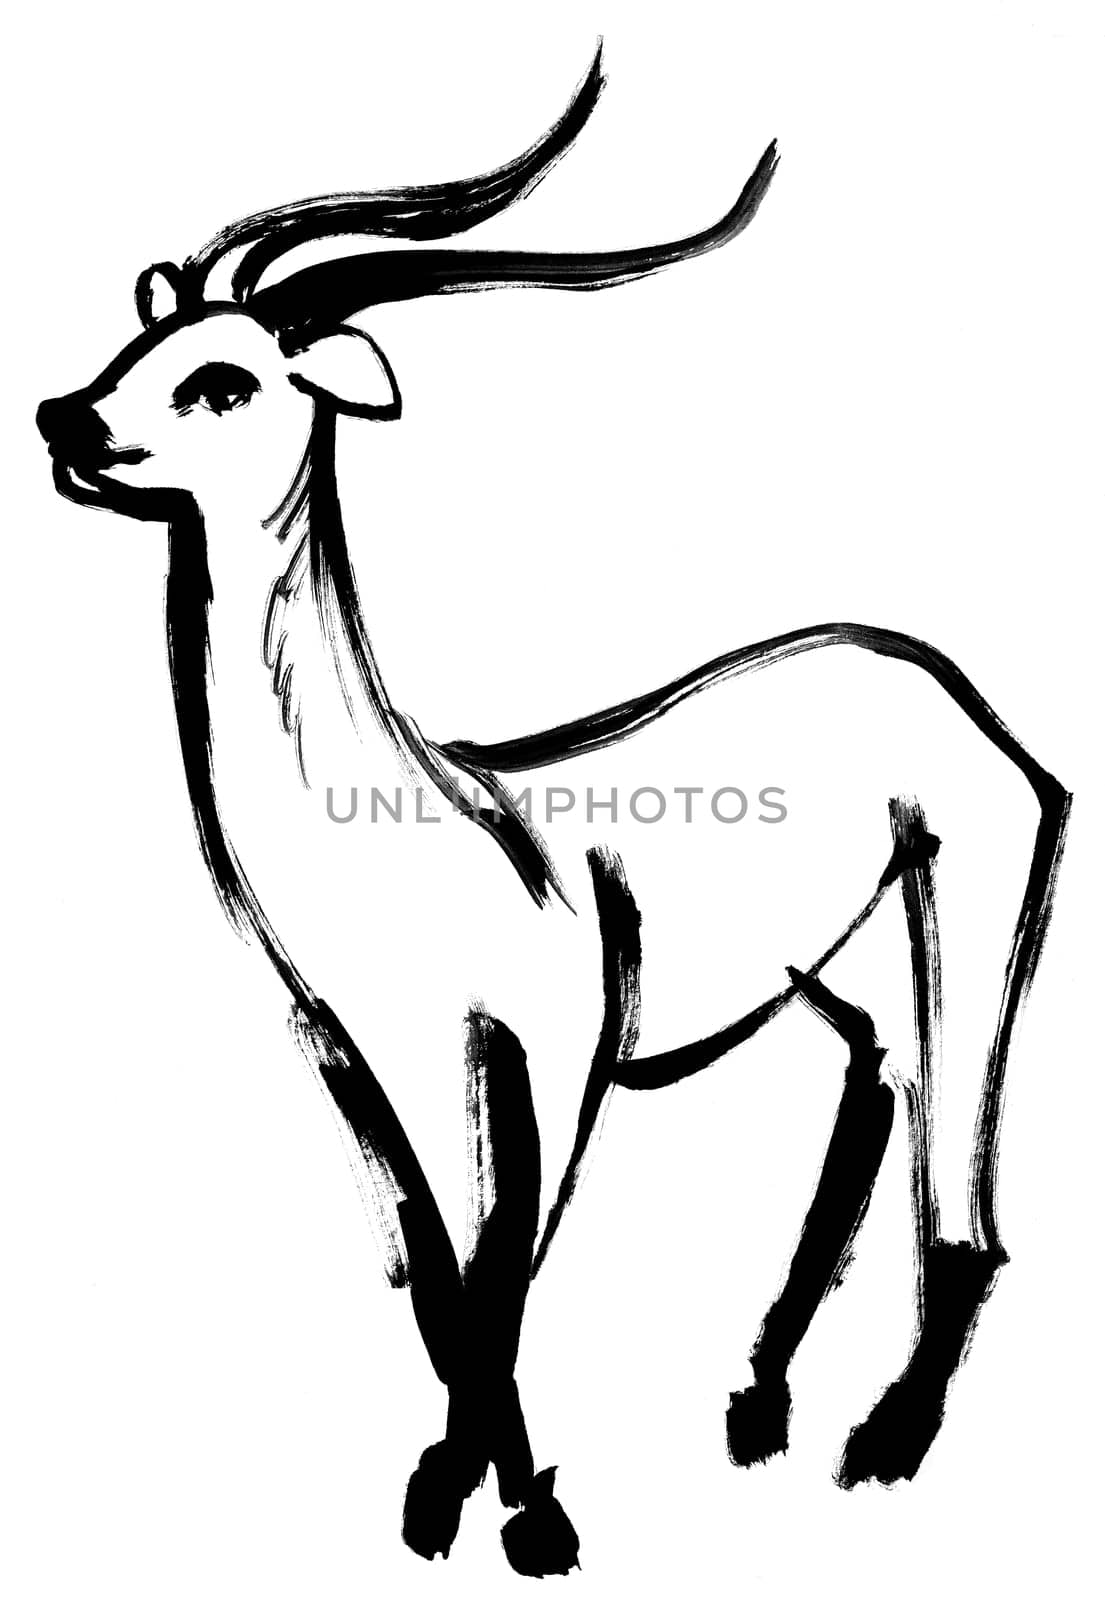 African antelope illustration painted in black gouache isolated on white paper by MarinaVoyush